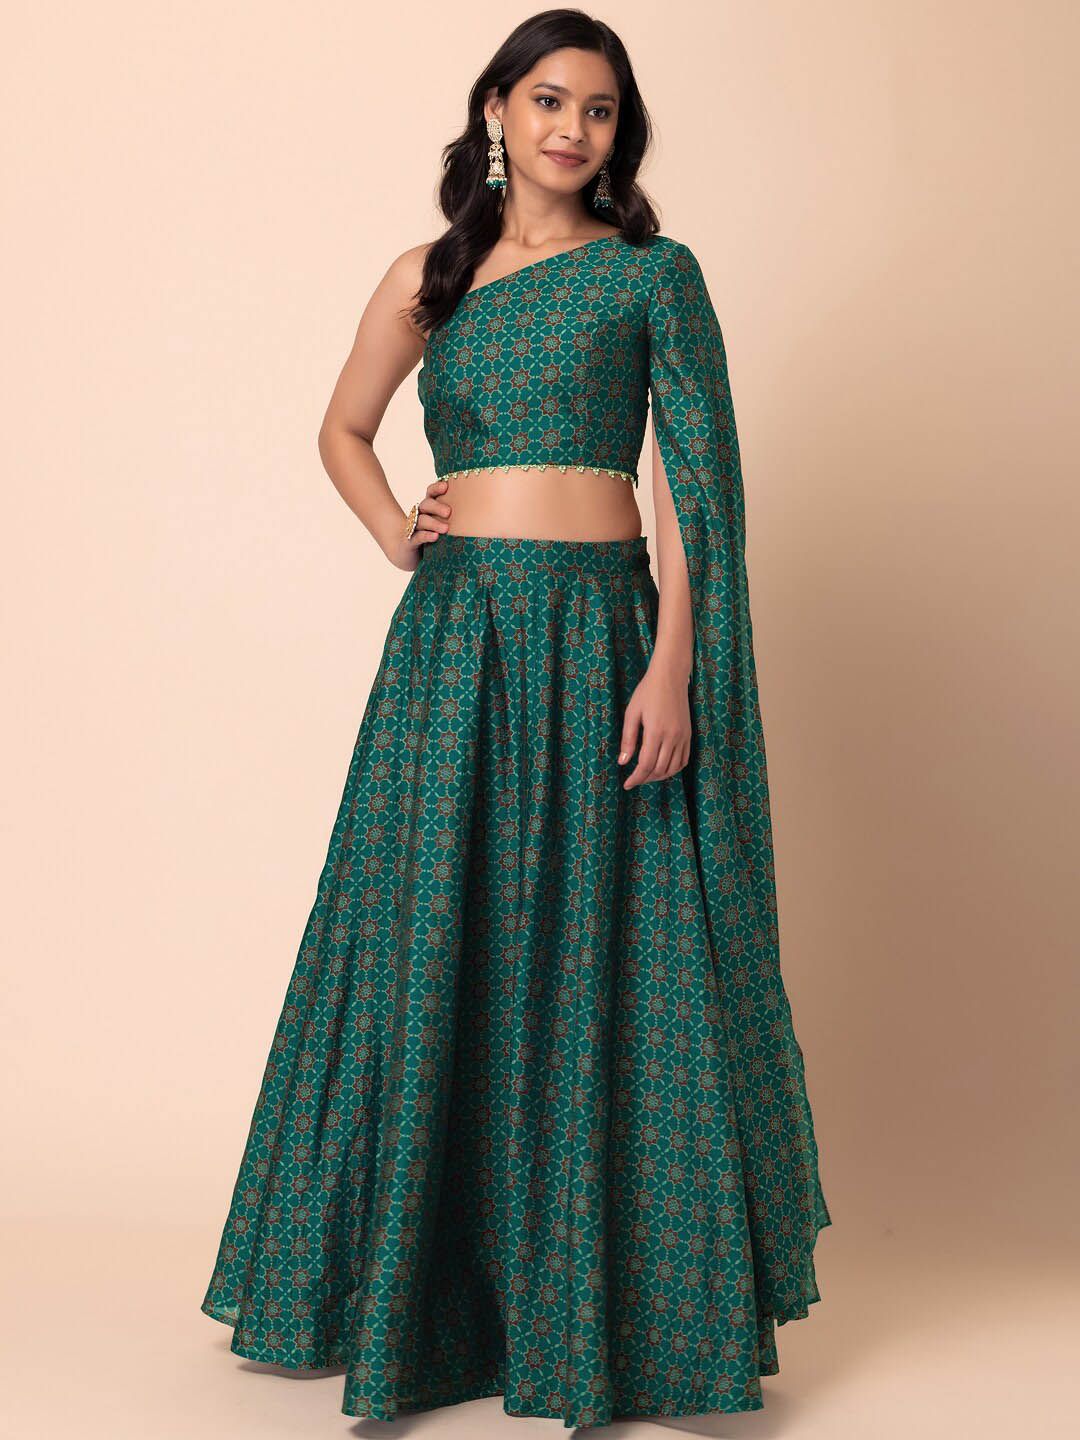 INDYA Floral Printed Lehenga With One Shoulder Blouse Price in India